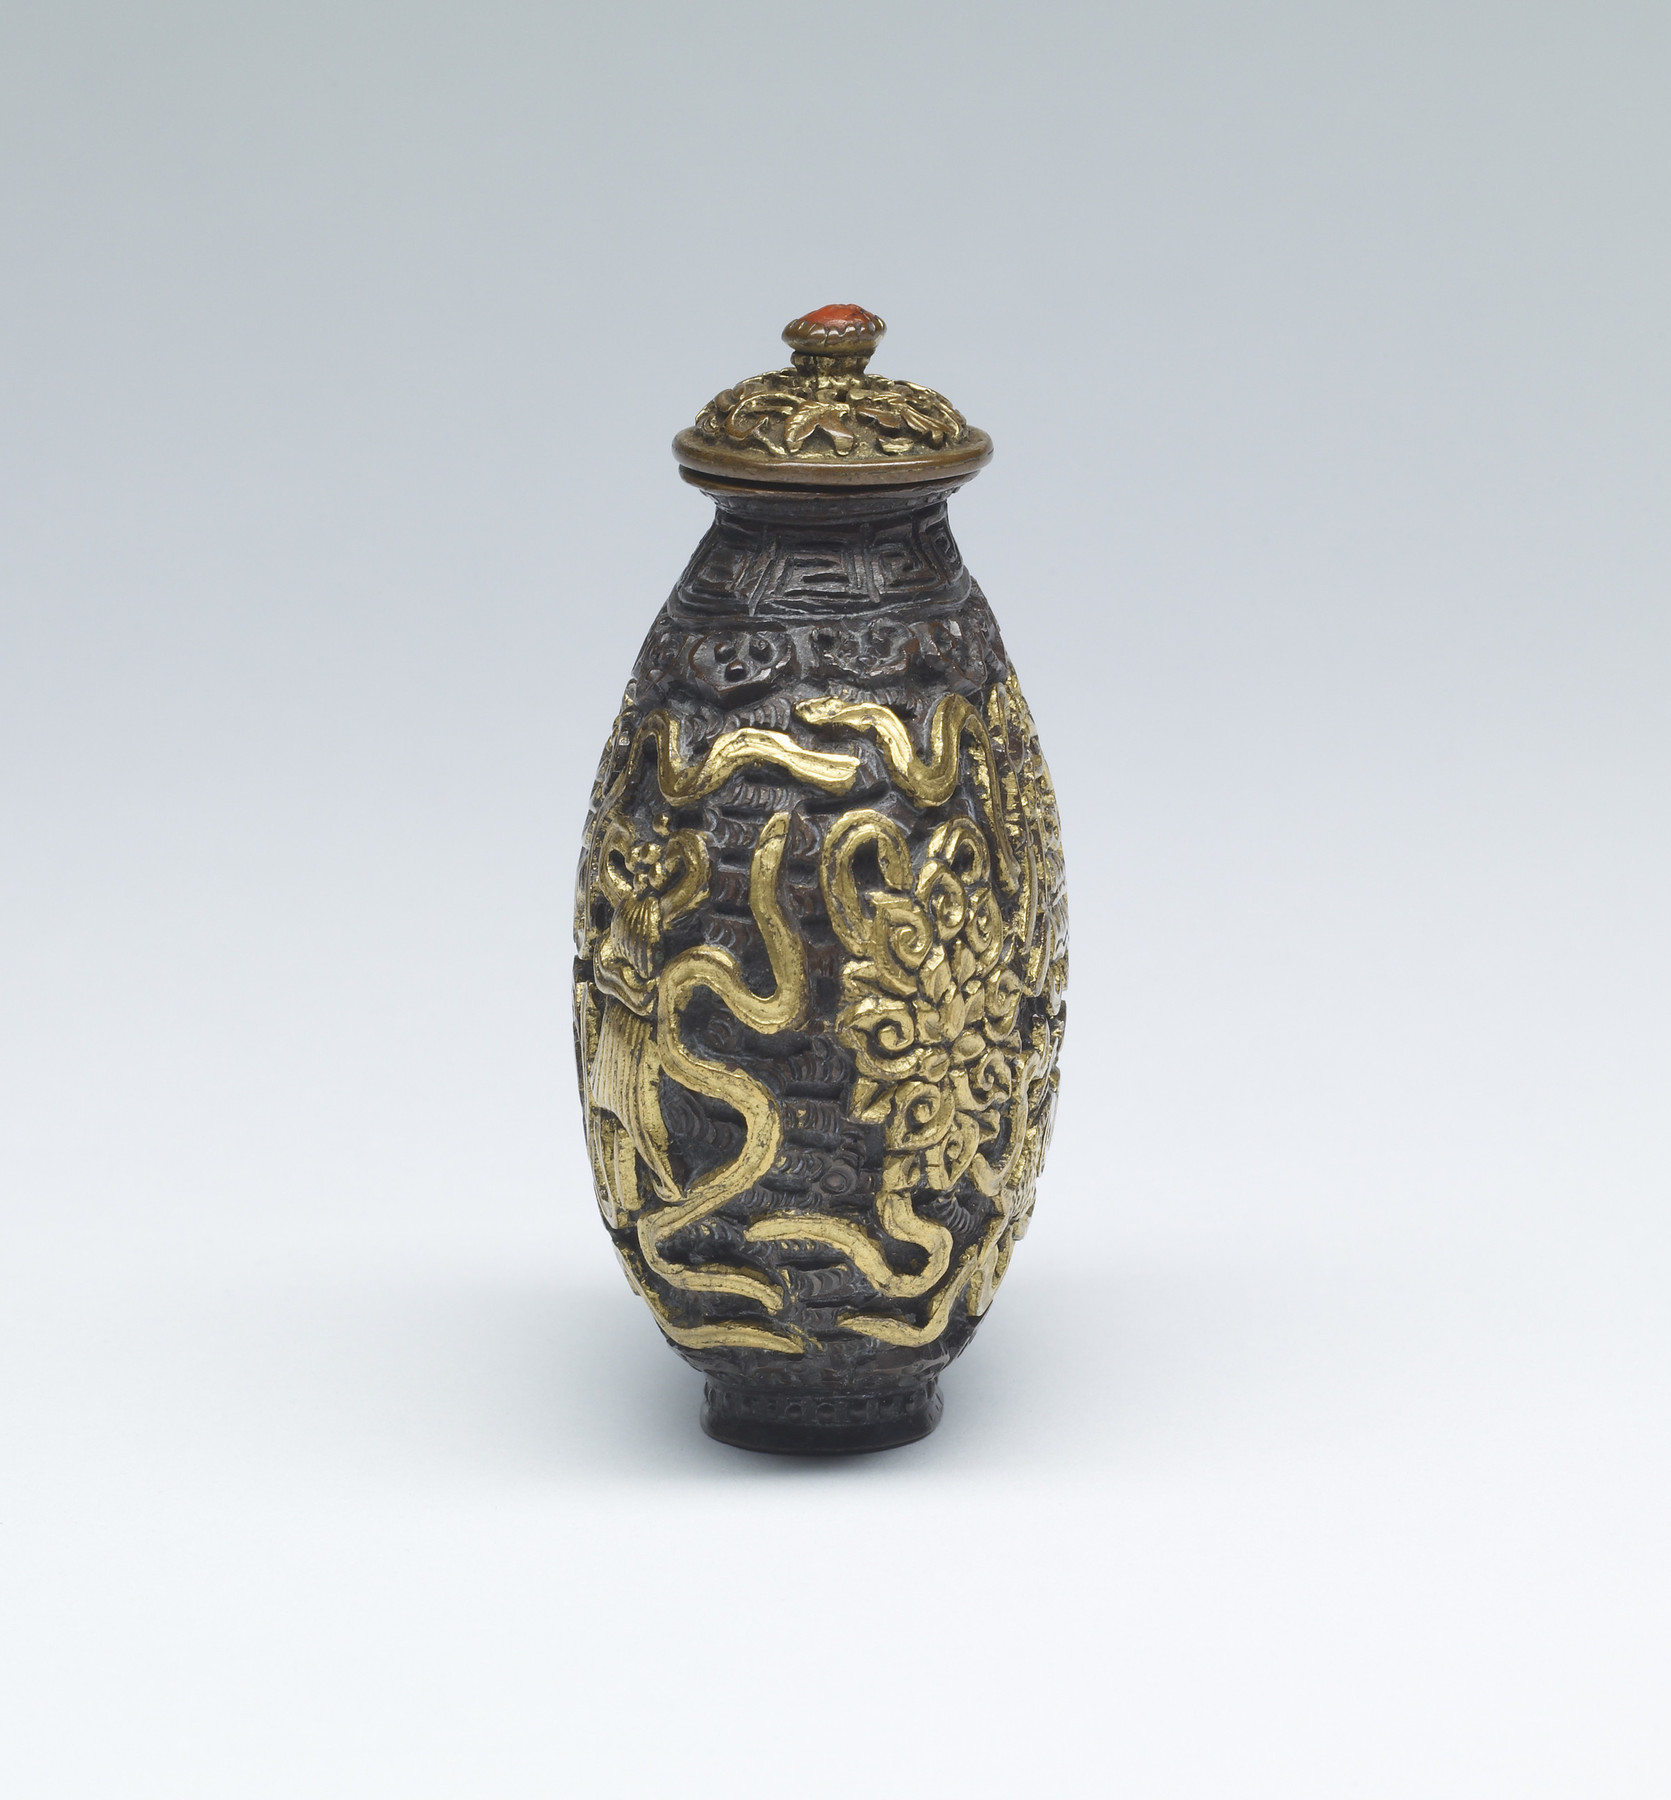 Chinese Snuff Bottles - The Walters Art Museum